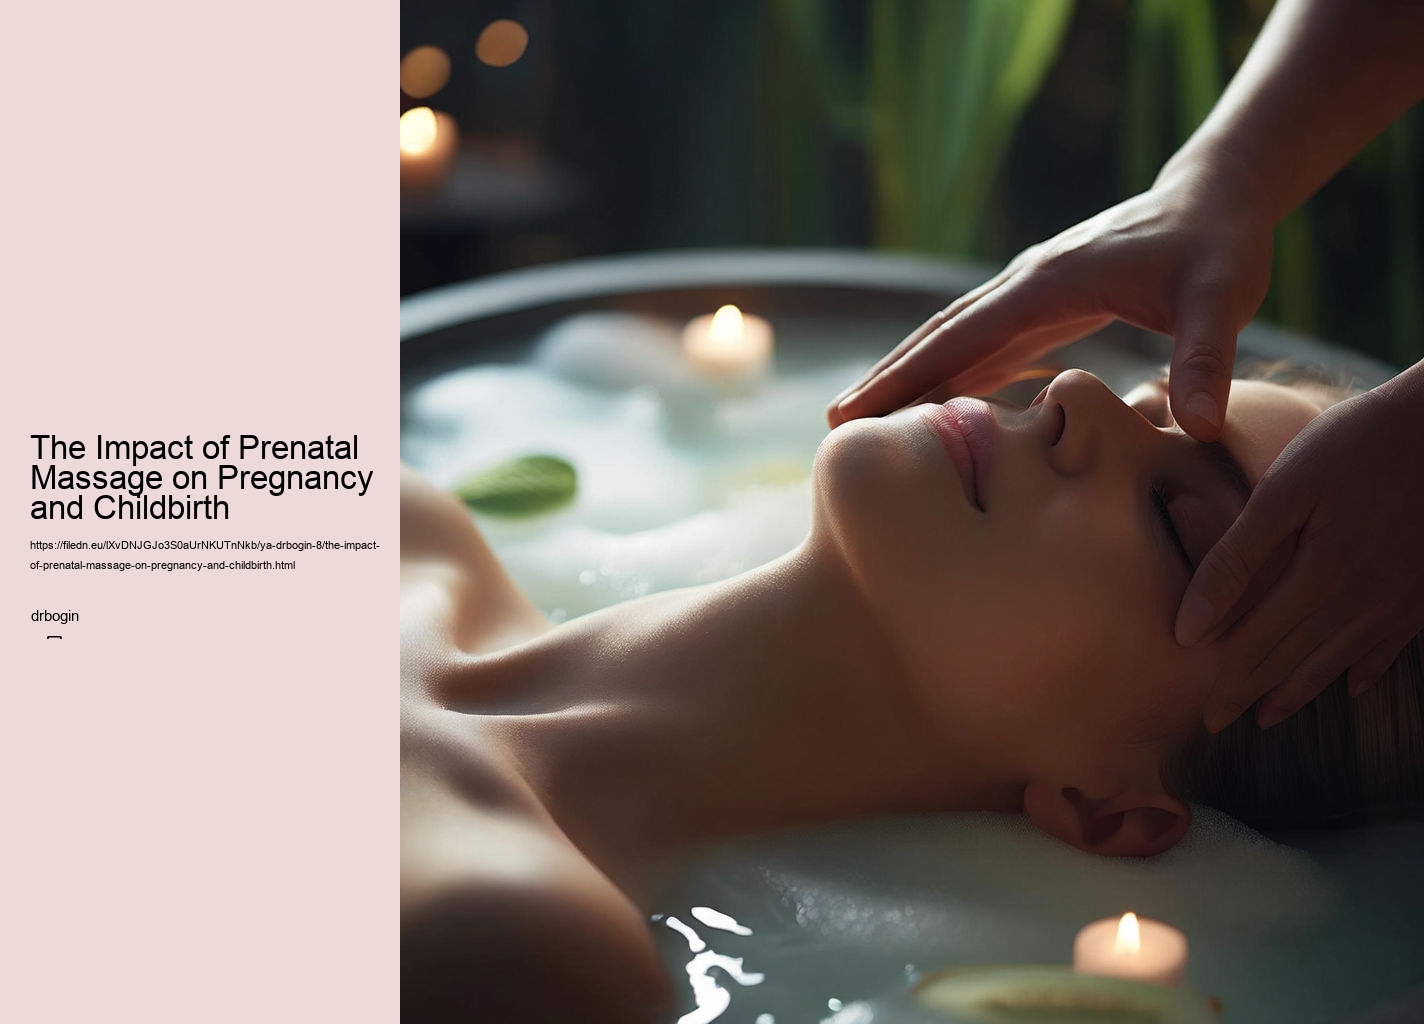 The Impact of Prenatal Massage on Pregnancy and Childbirth